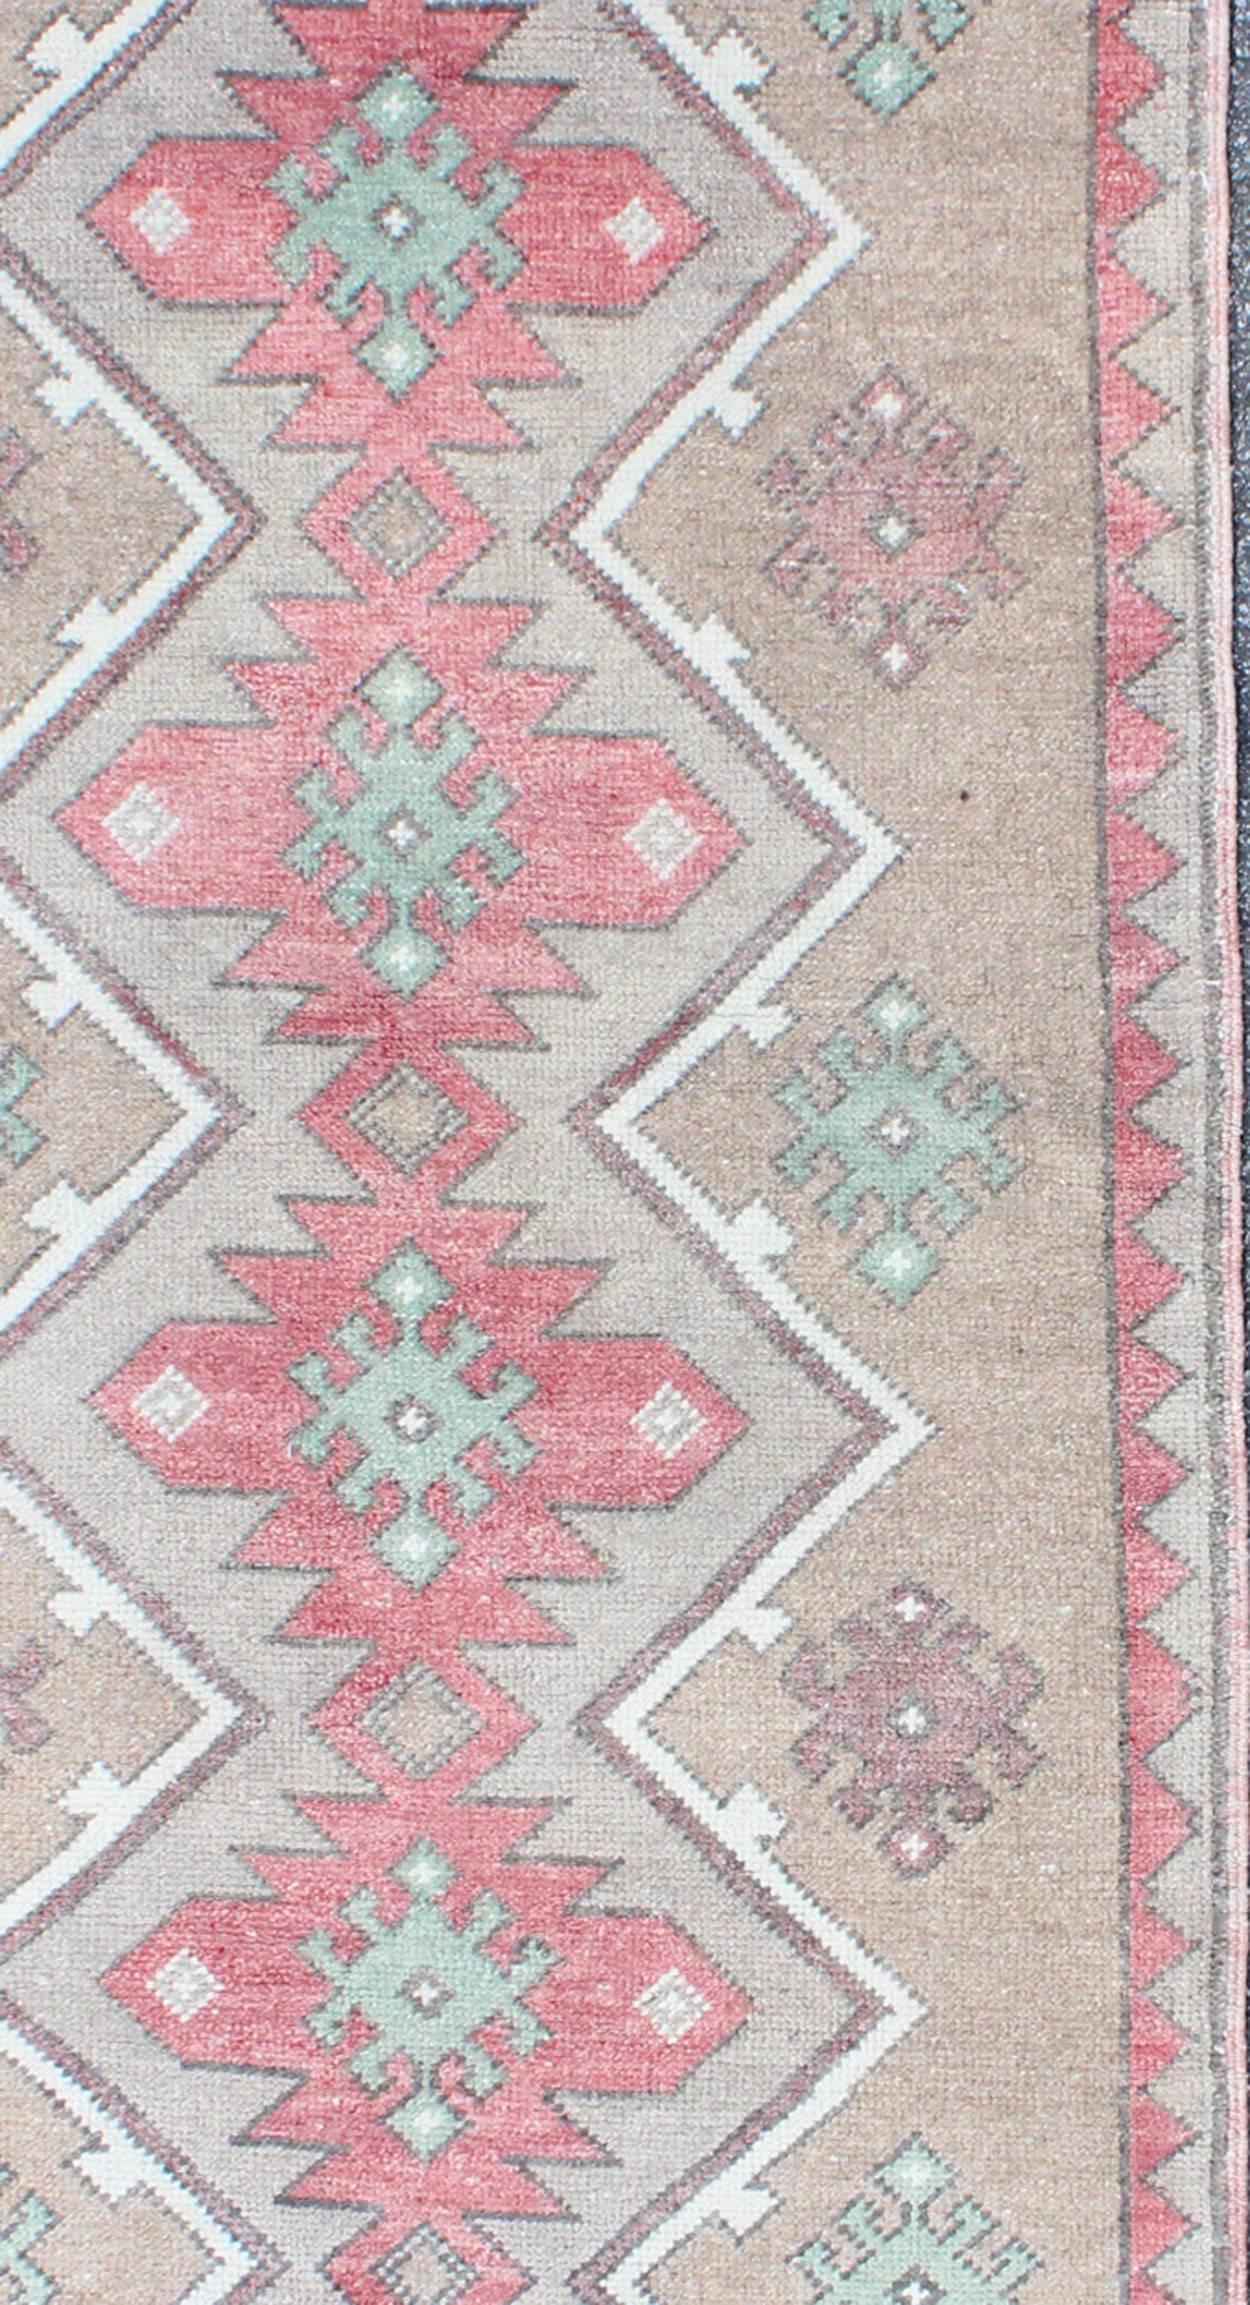 Turkish Tulu Runner With Geometric Medallions in Vivid Coral, Tan, Mint Green In Good Condition For Sale In Atlanta, GA